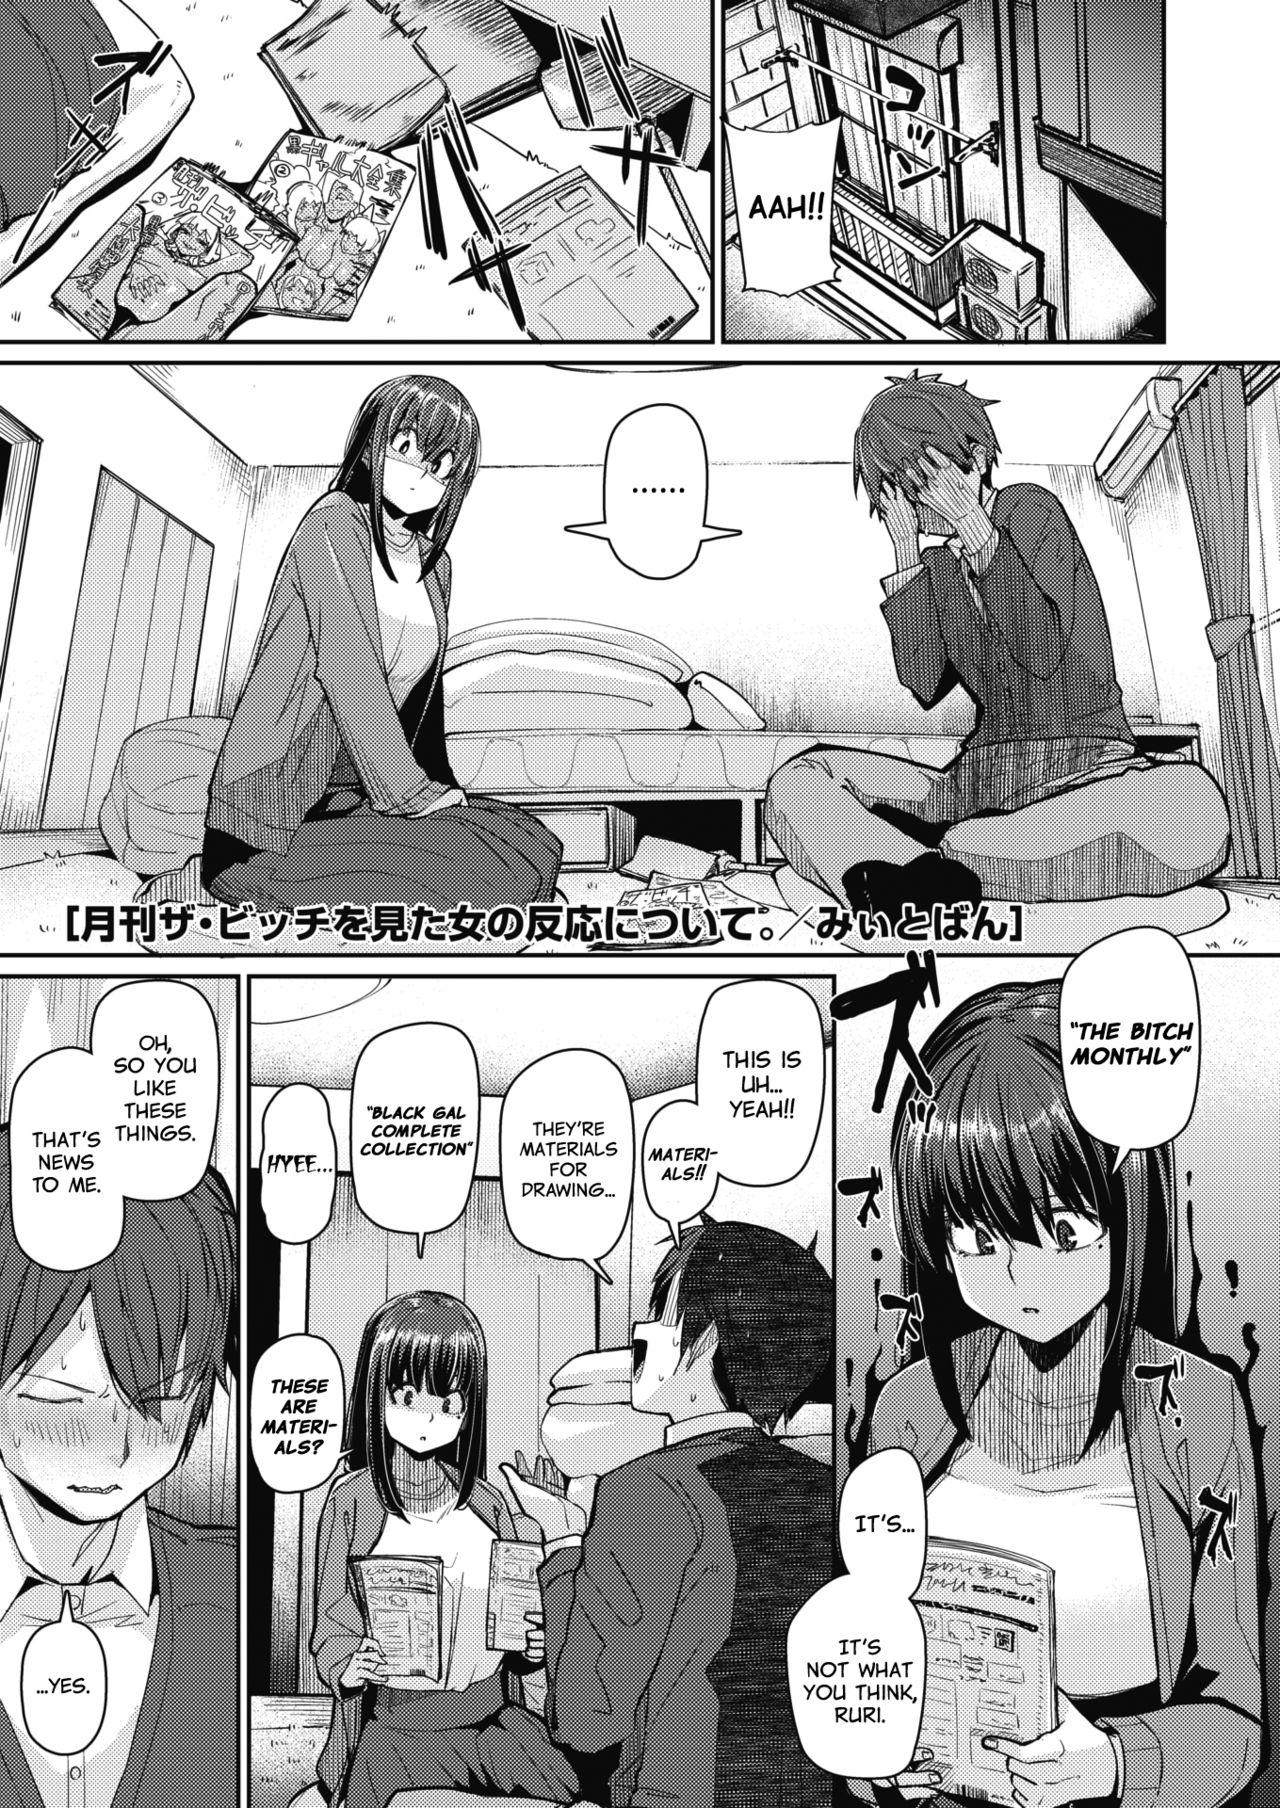 Secret Gekkan "Za Bicchi" wo Mita Onna no Hannou ni Tsuite | About the Reaction of the Girl Who Saw "The Bitch Monthly" Foot Job - Picture 1